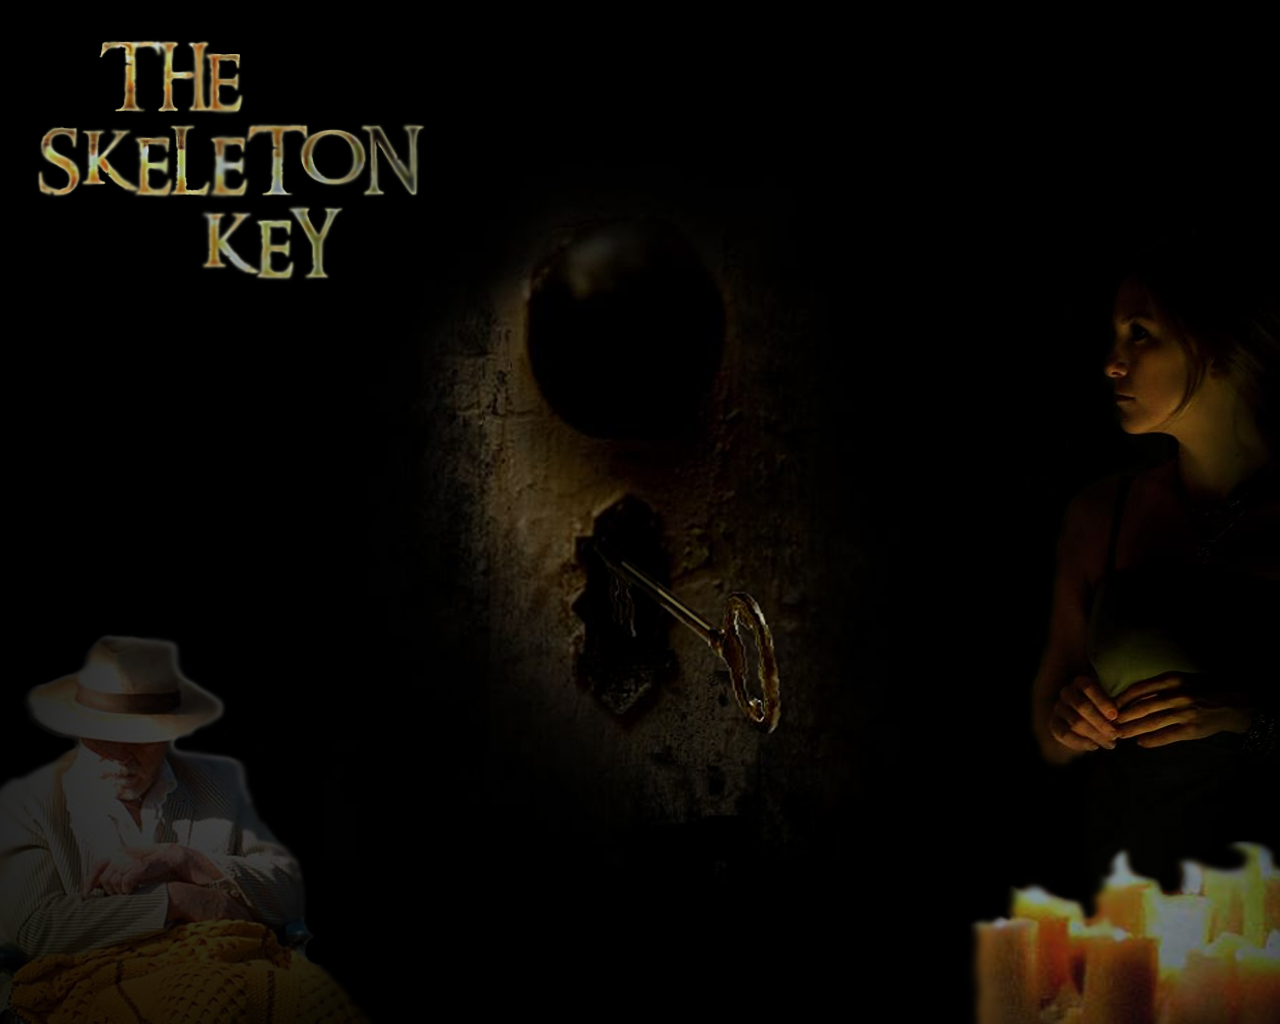 Download High quality The Skeleton Key wallpaper / Movies / 1280x1024